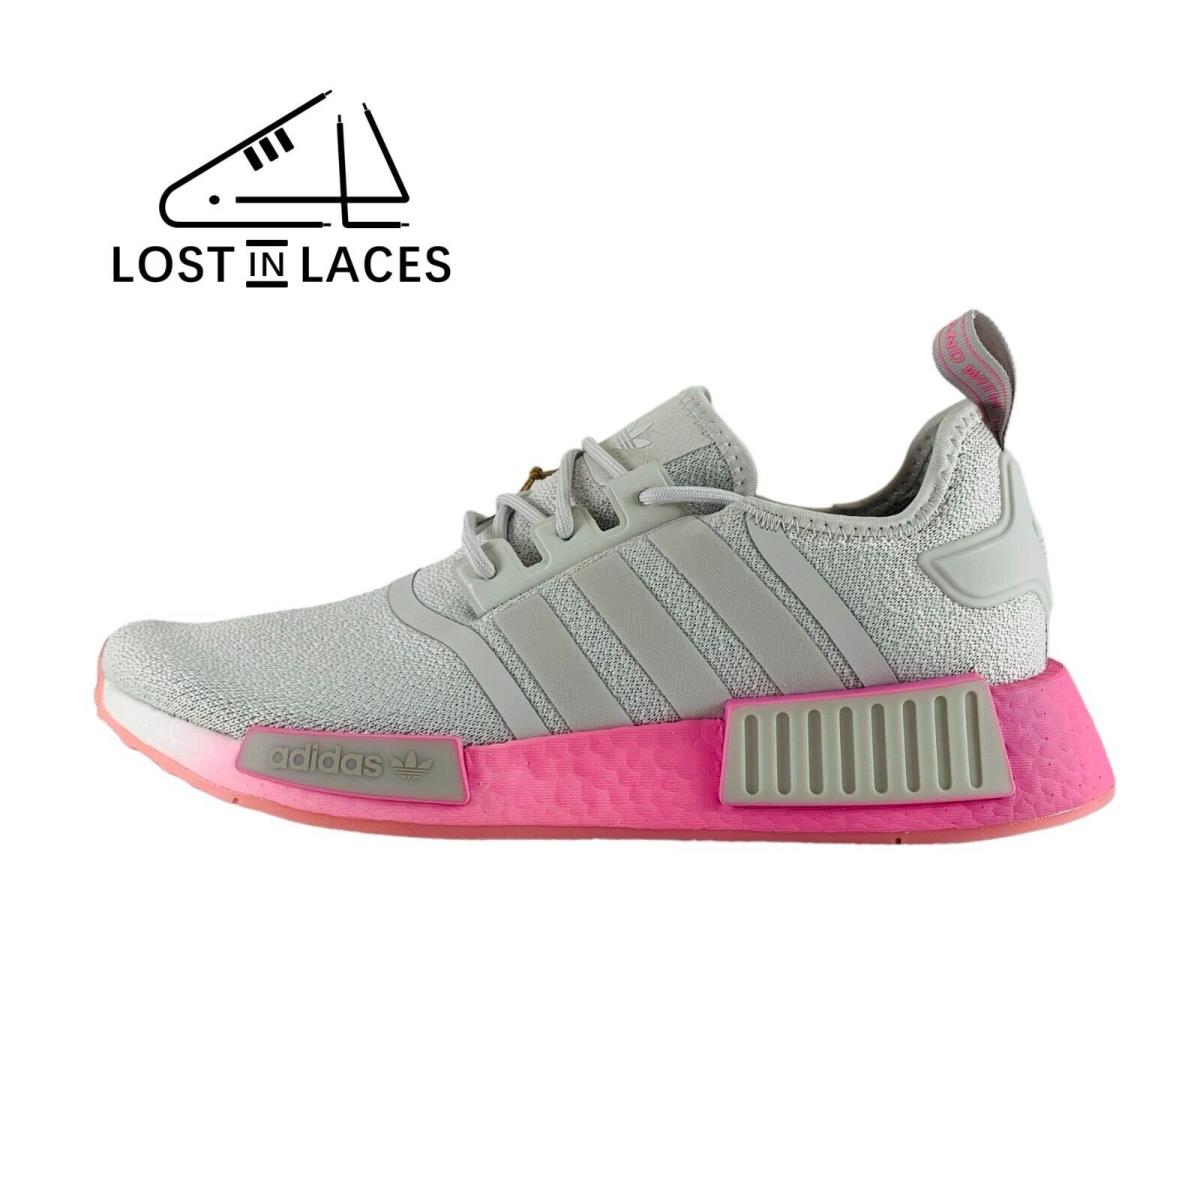 Adidas NMD_R1 Grey Bliss Pink Sneakers Shoes GW9462 Women`s Sizes